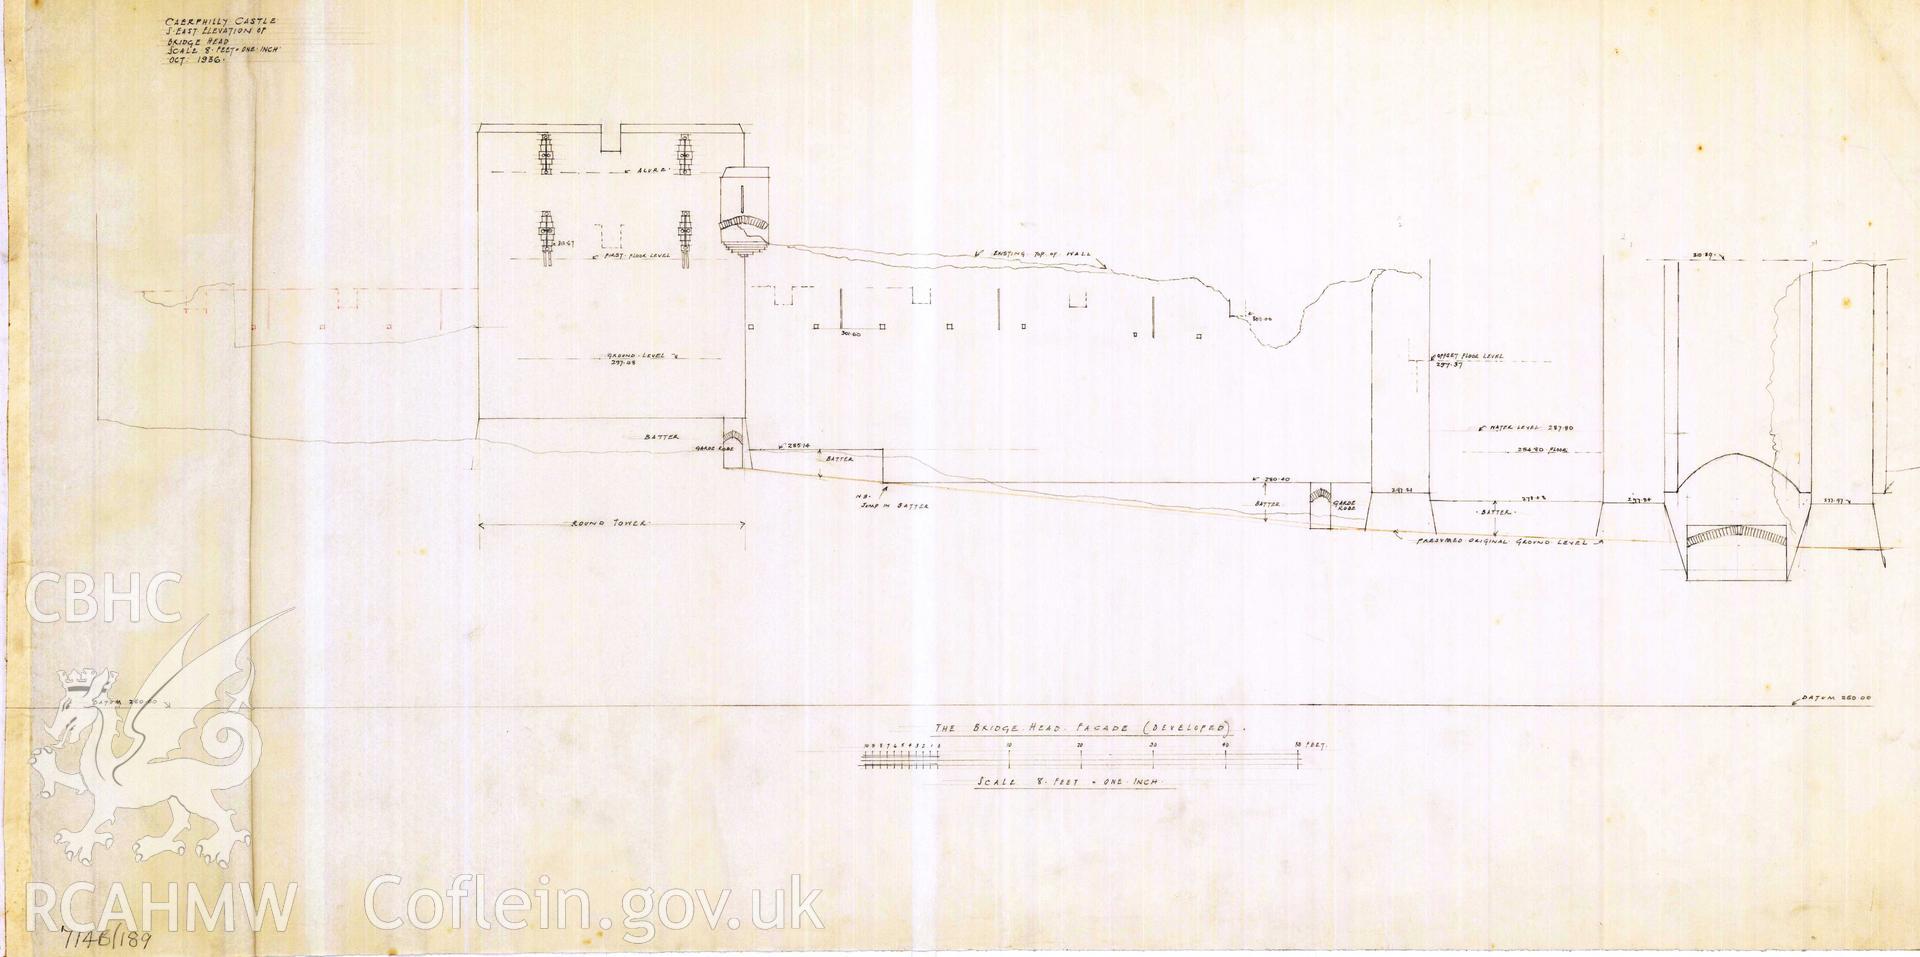 Cadw guardianship monument drawing of Caerphilly Castle. Dam S curtain+tower, ext elev. Cadw Ref. No:714B/189. Scale 1:96.